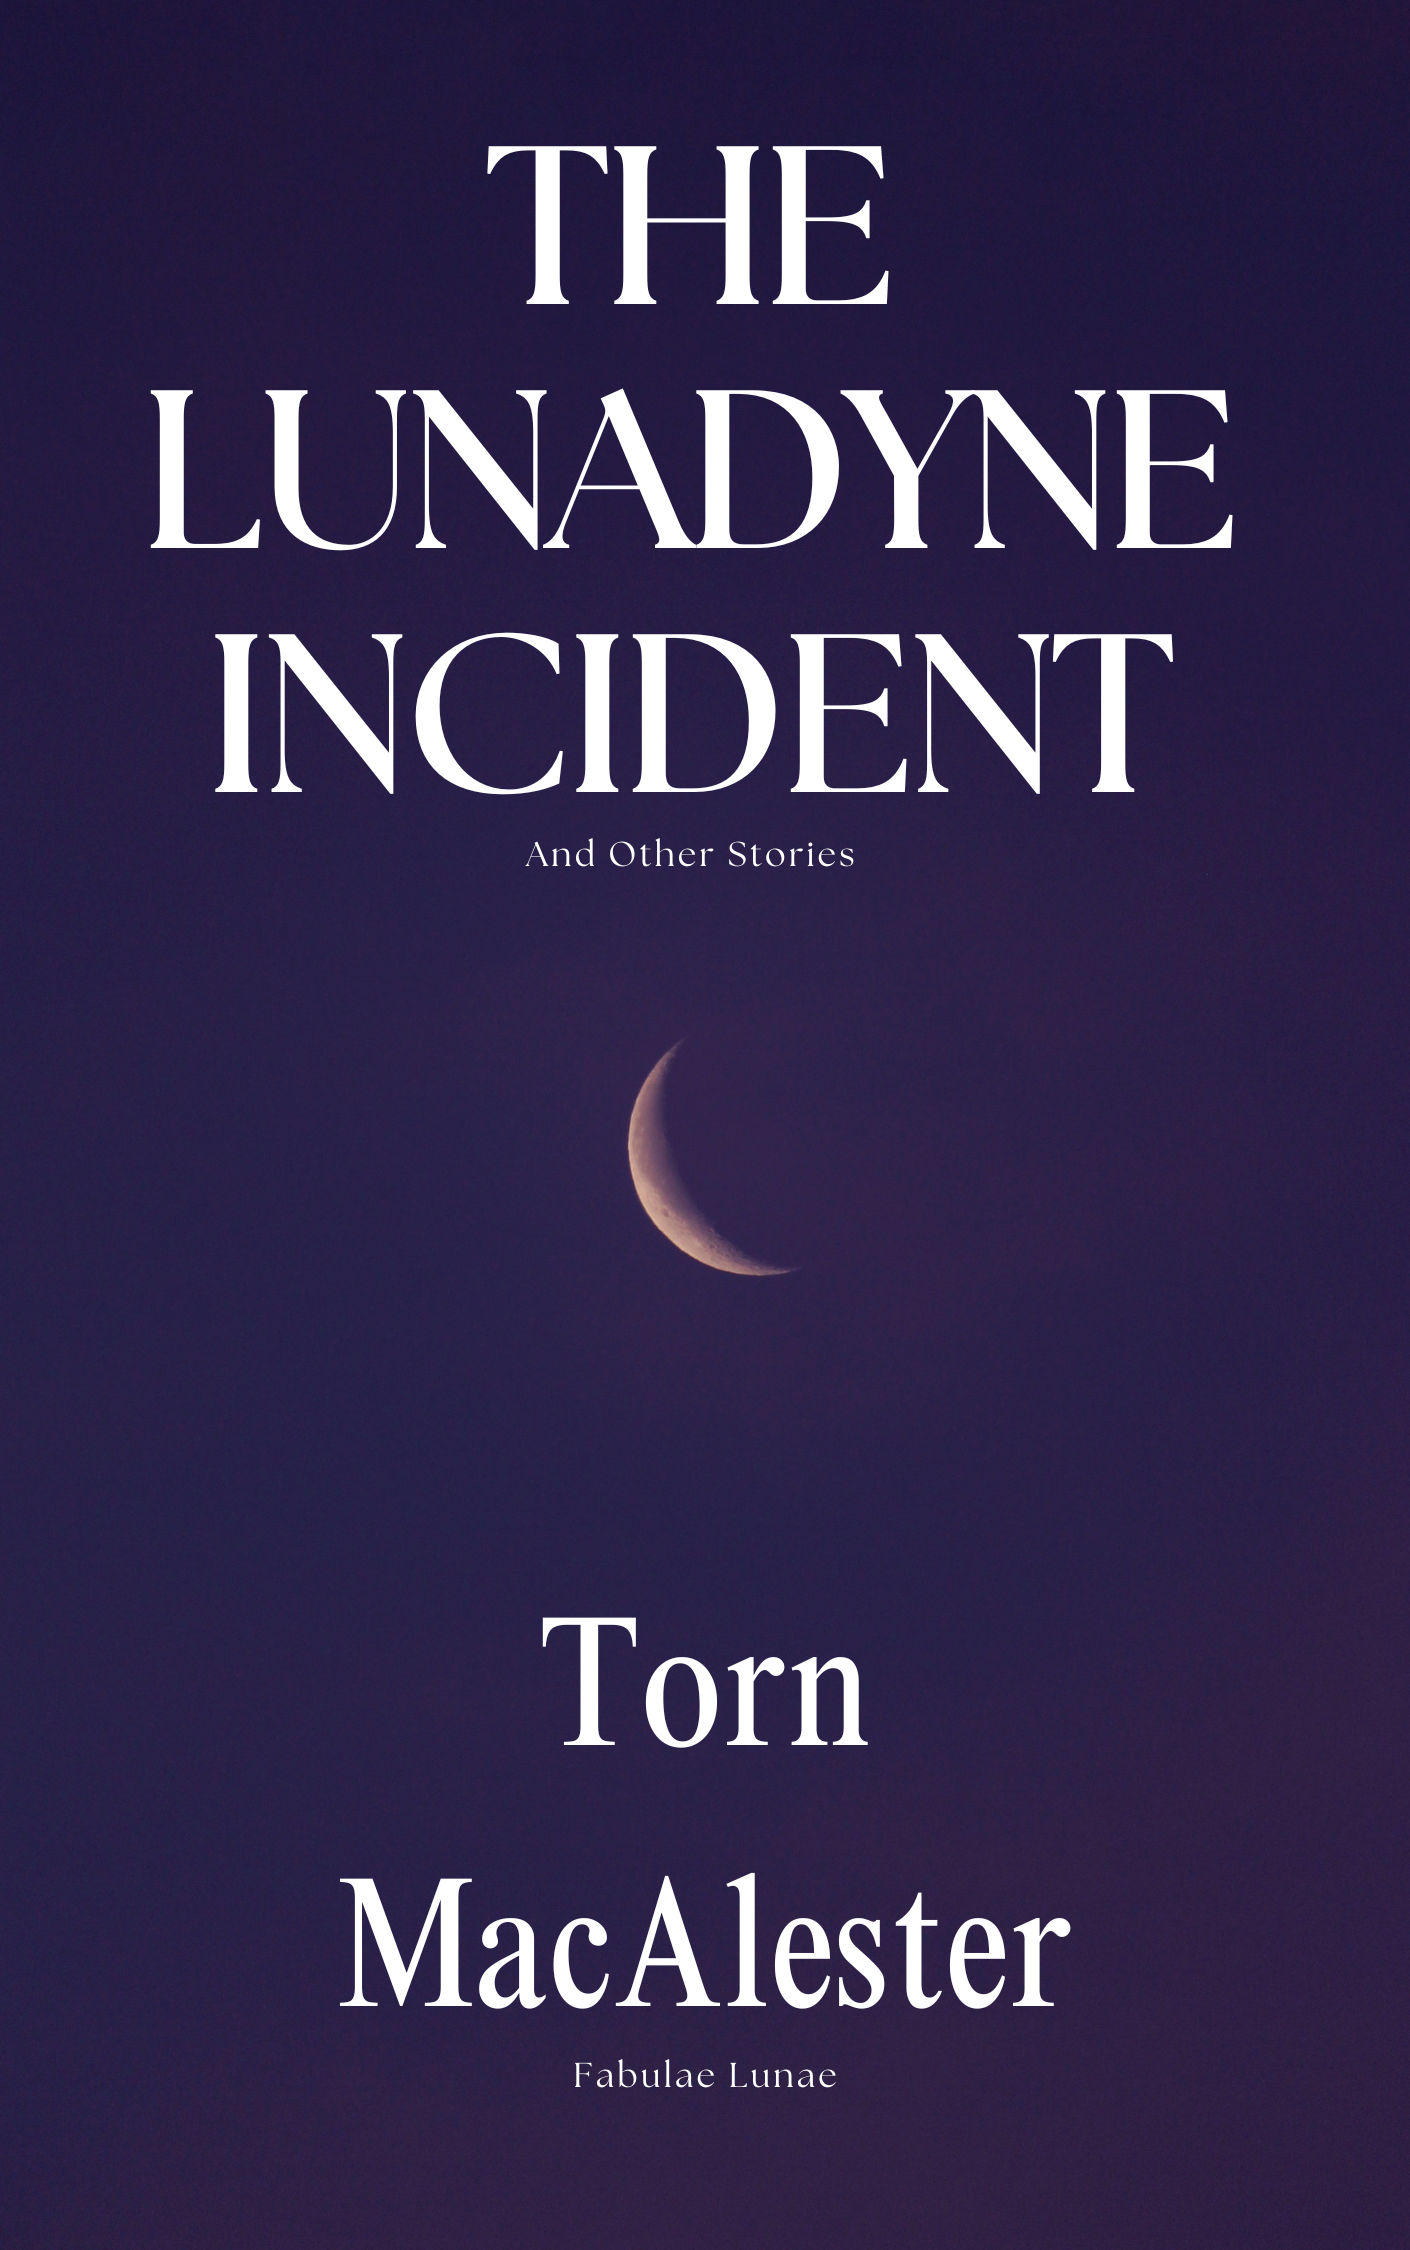 The Lunadyne Incident and Other Stories